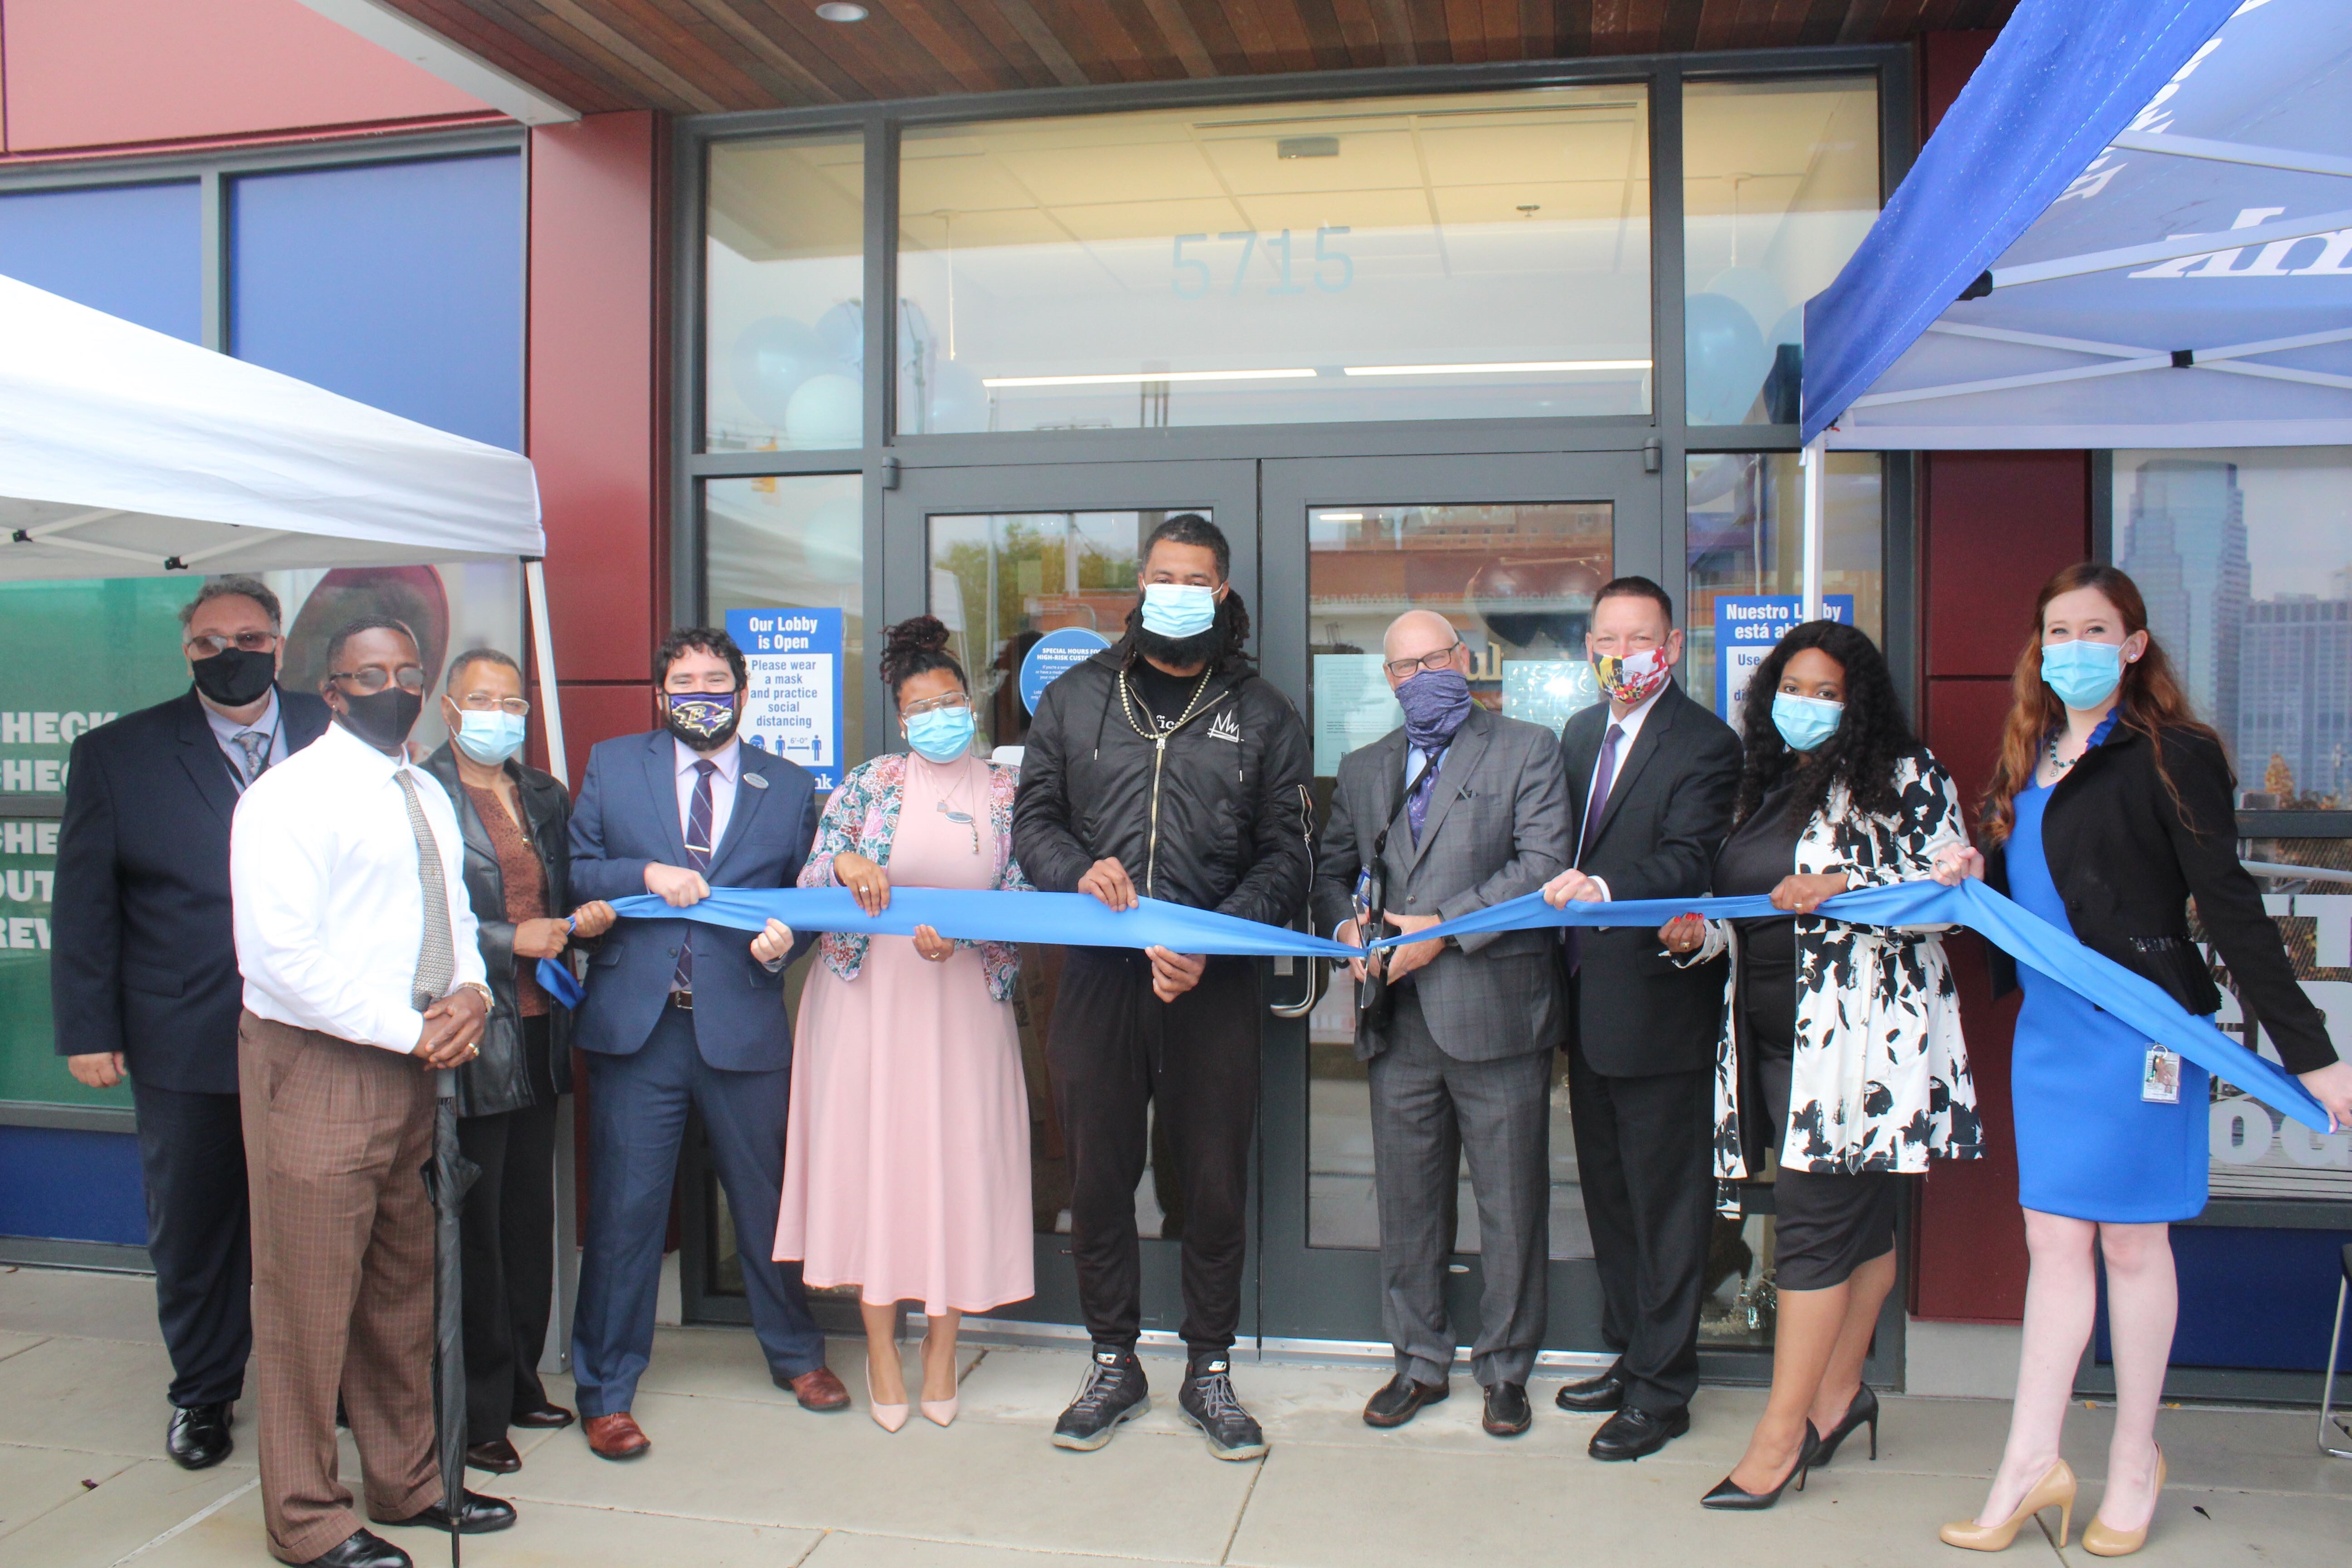 Fulton Bank leadership and Baltimore community members cut ribbon in front of new branch